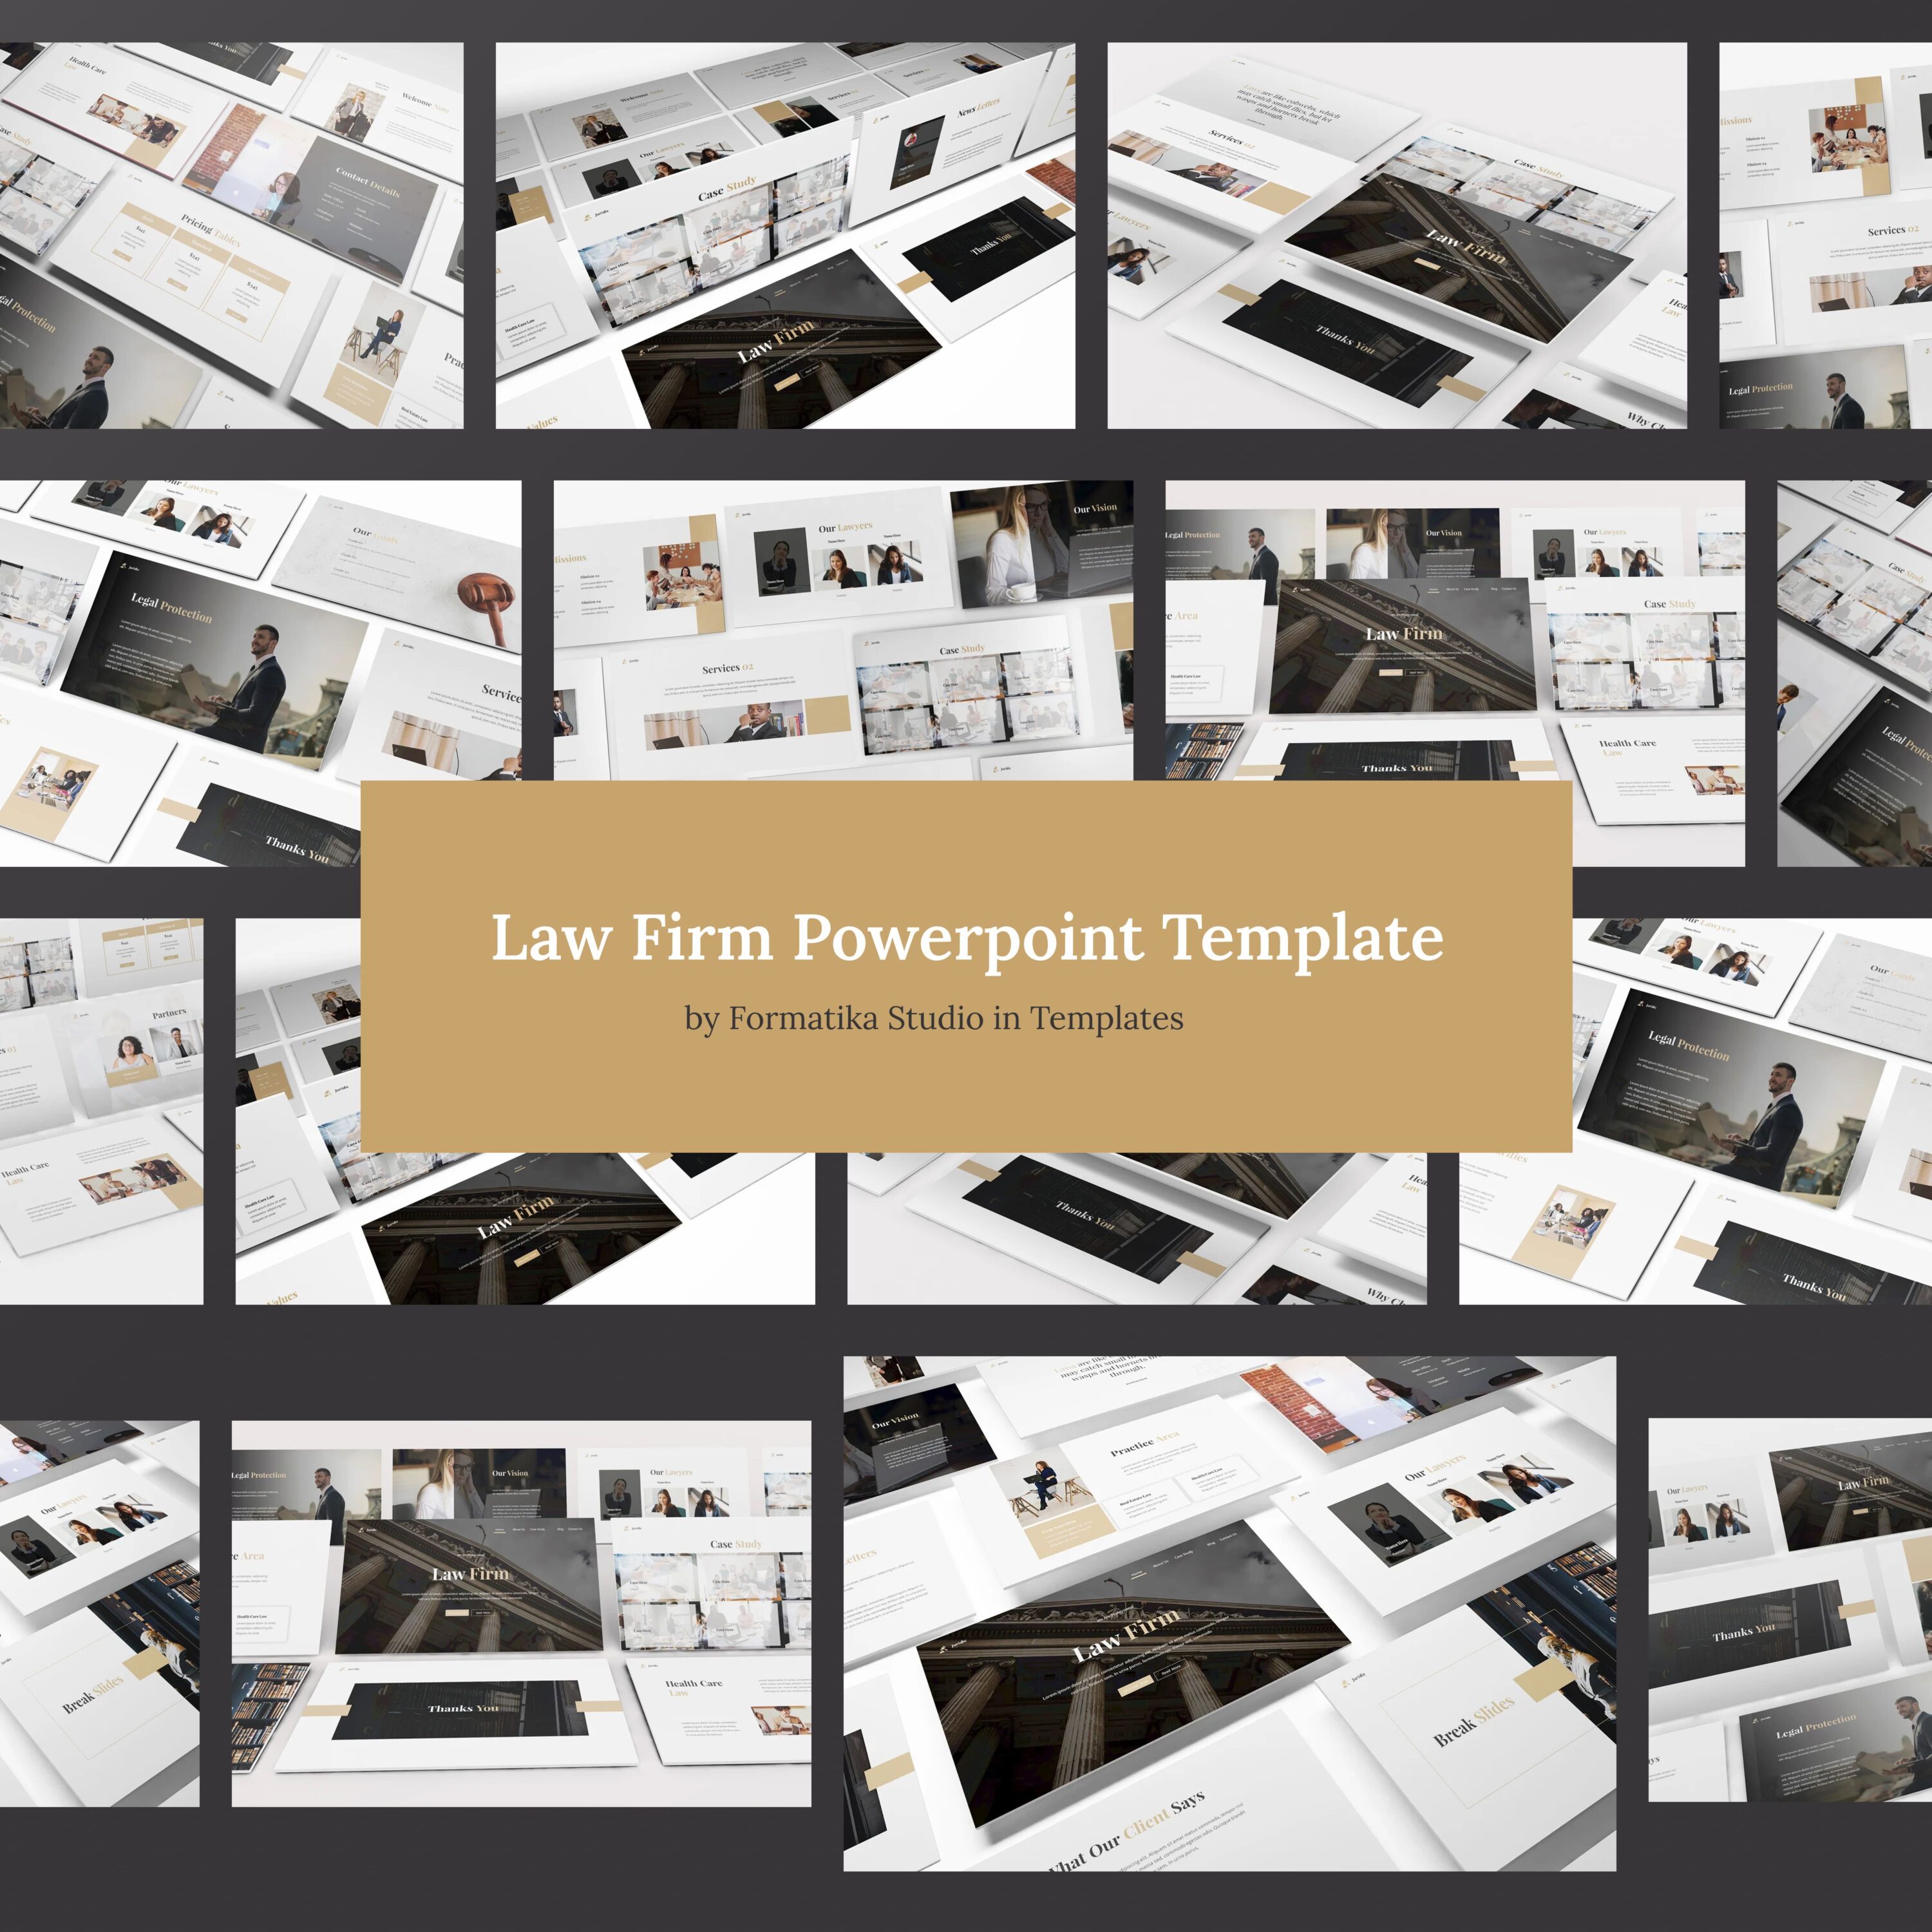 2law firm powerpoint template.